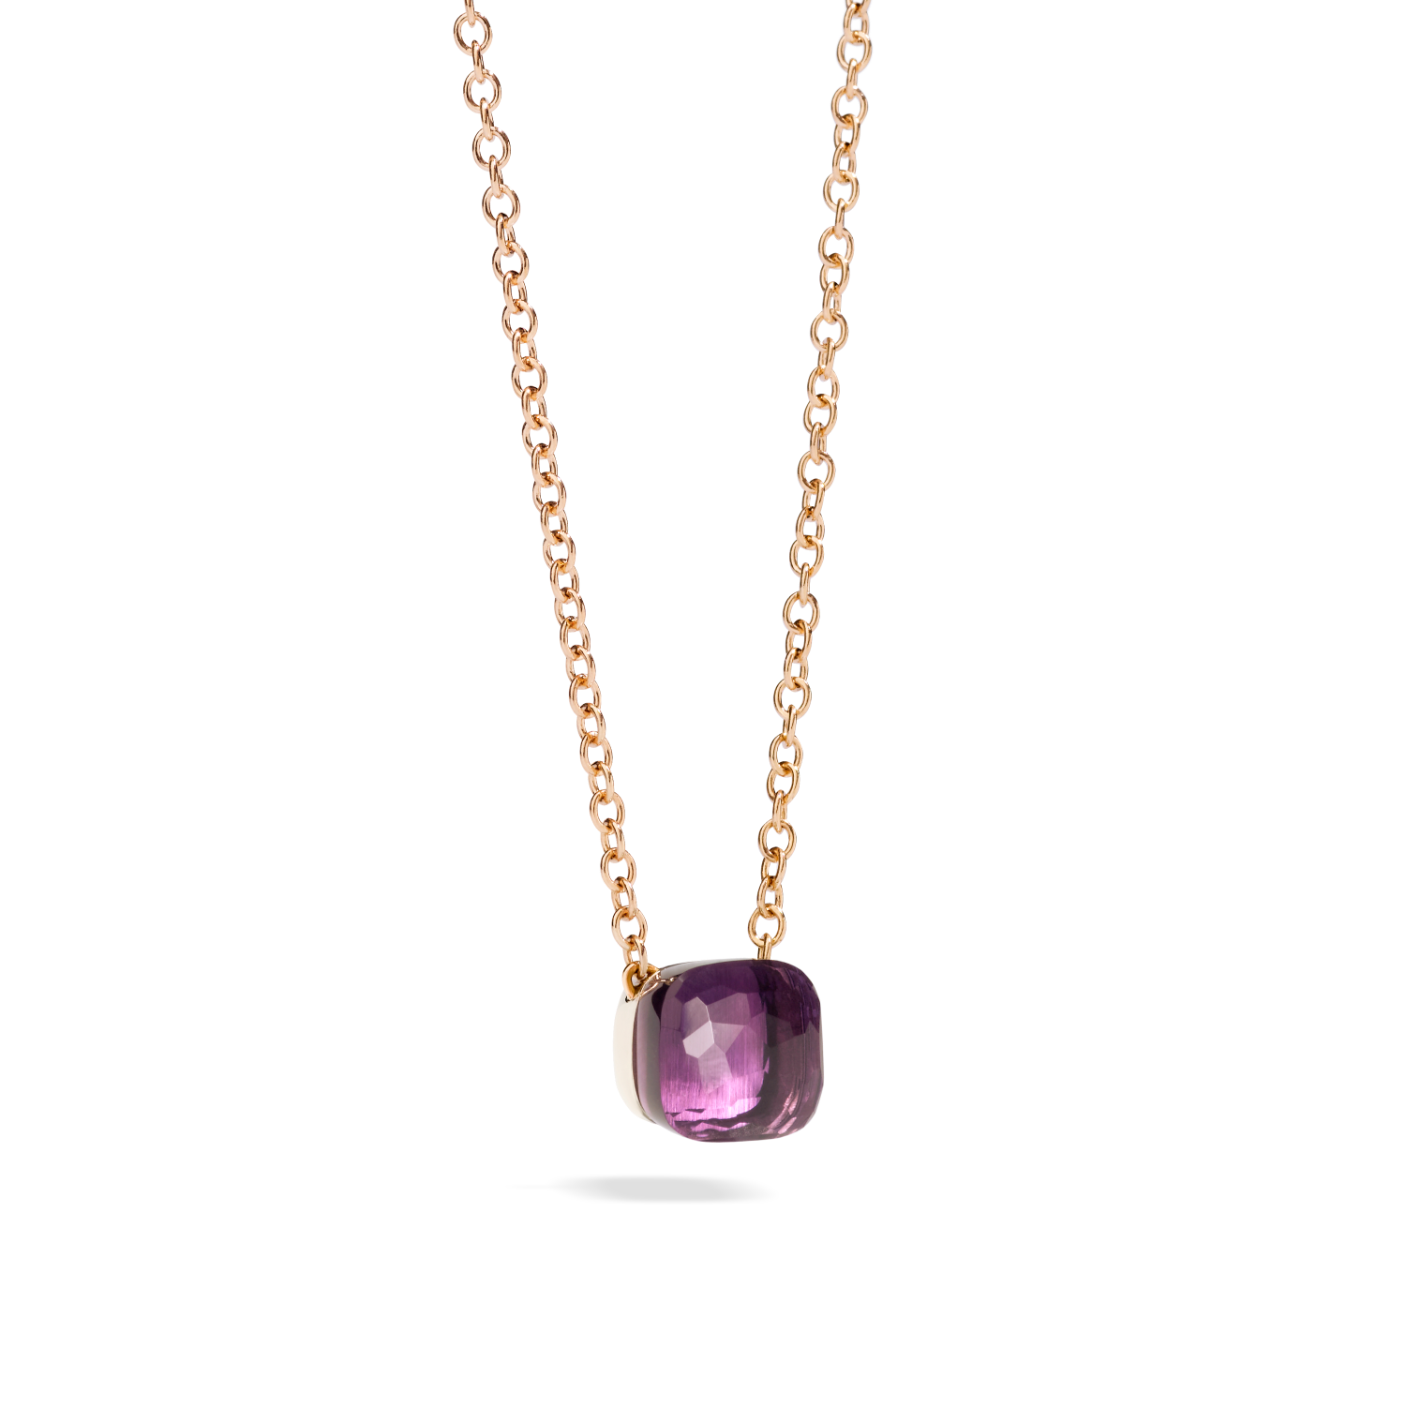 PCB6010_O6000_000OI_010_Pomellato_pendant-with-chain-nudo-rose-gold-18kt-white-gold-18kt-amethyst.png